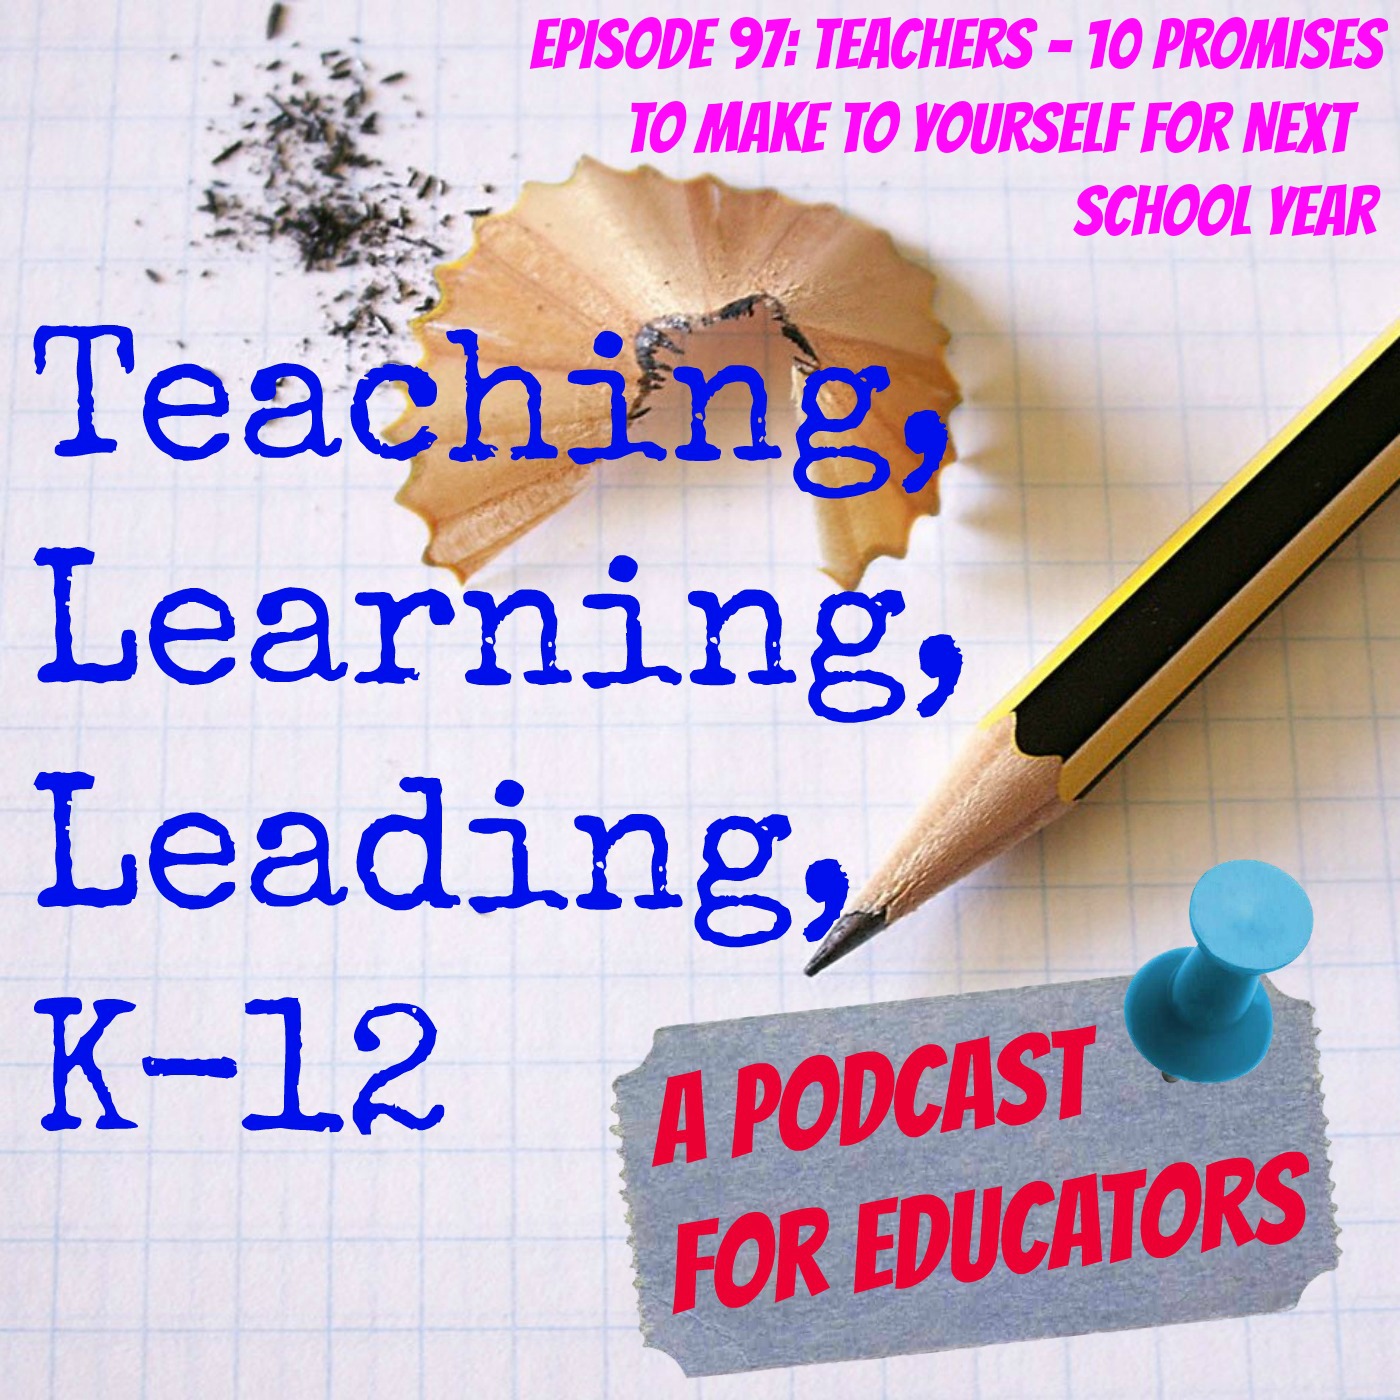 Episode 97: Teachers - 10 Promises to Make Yourself for Next School Year Image